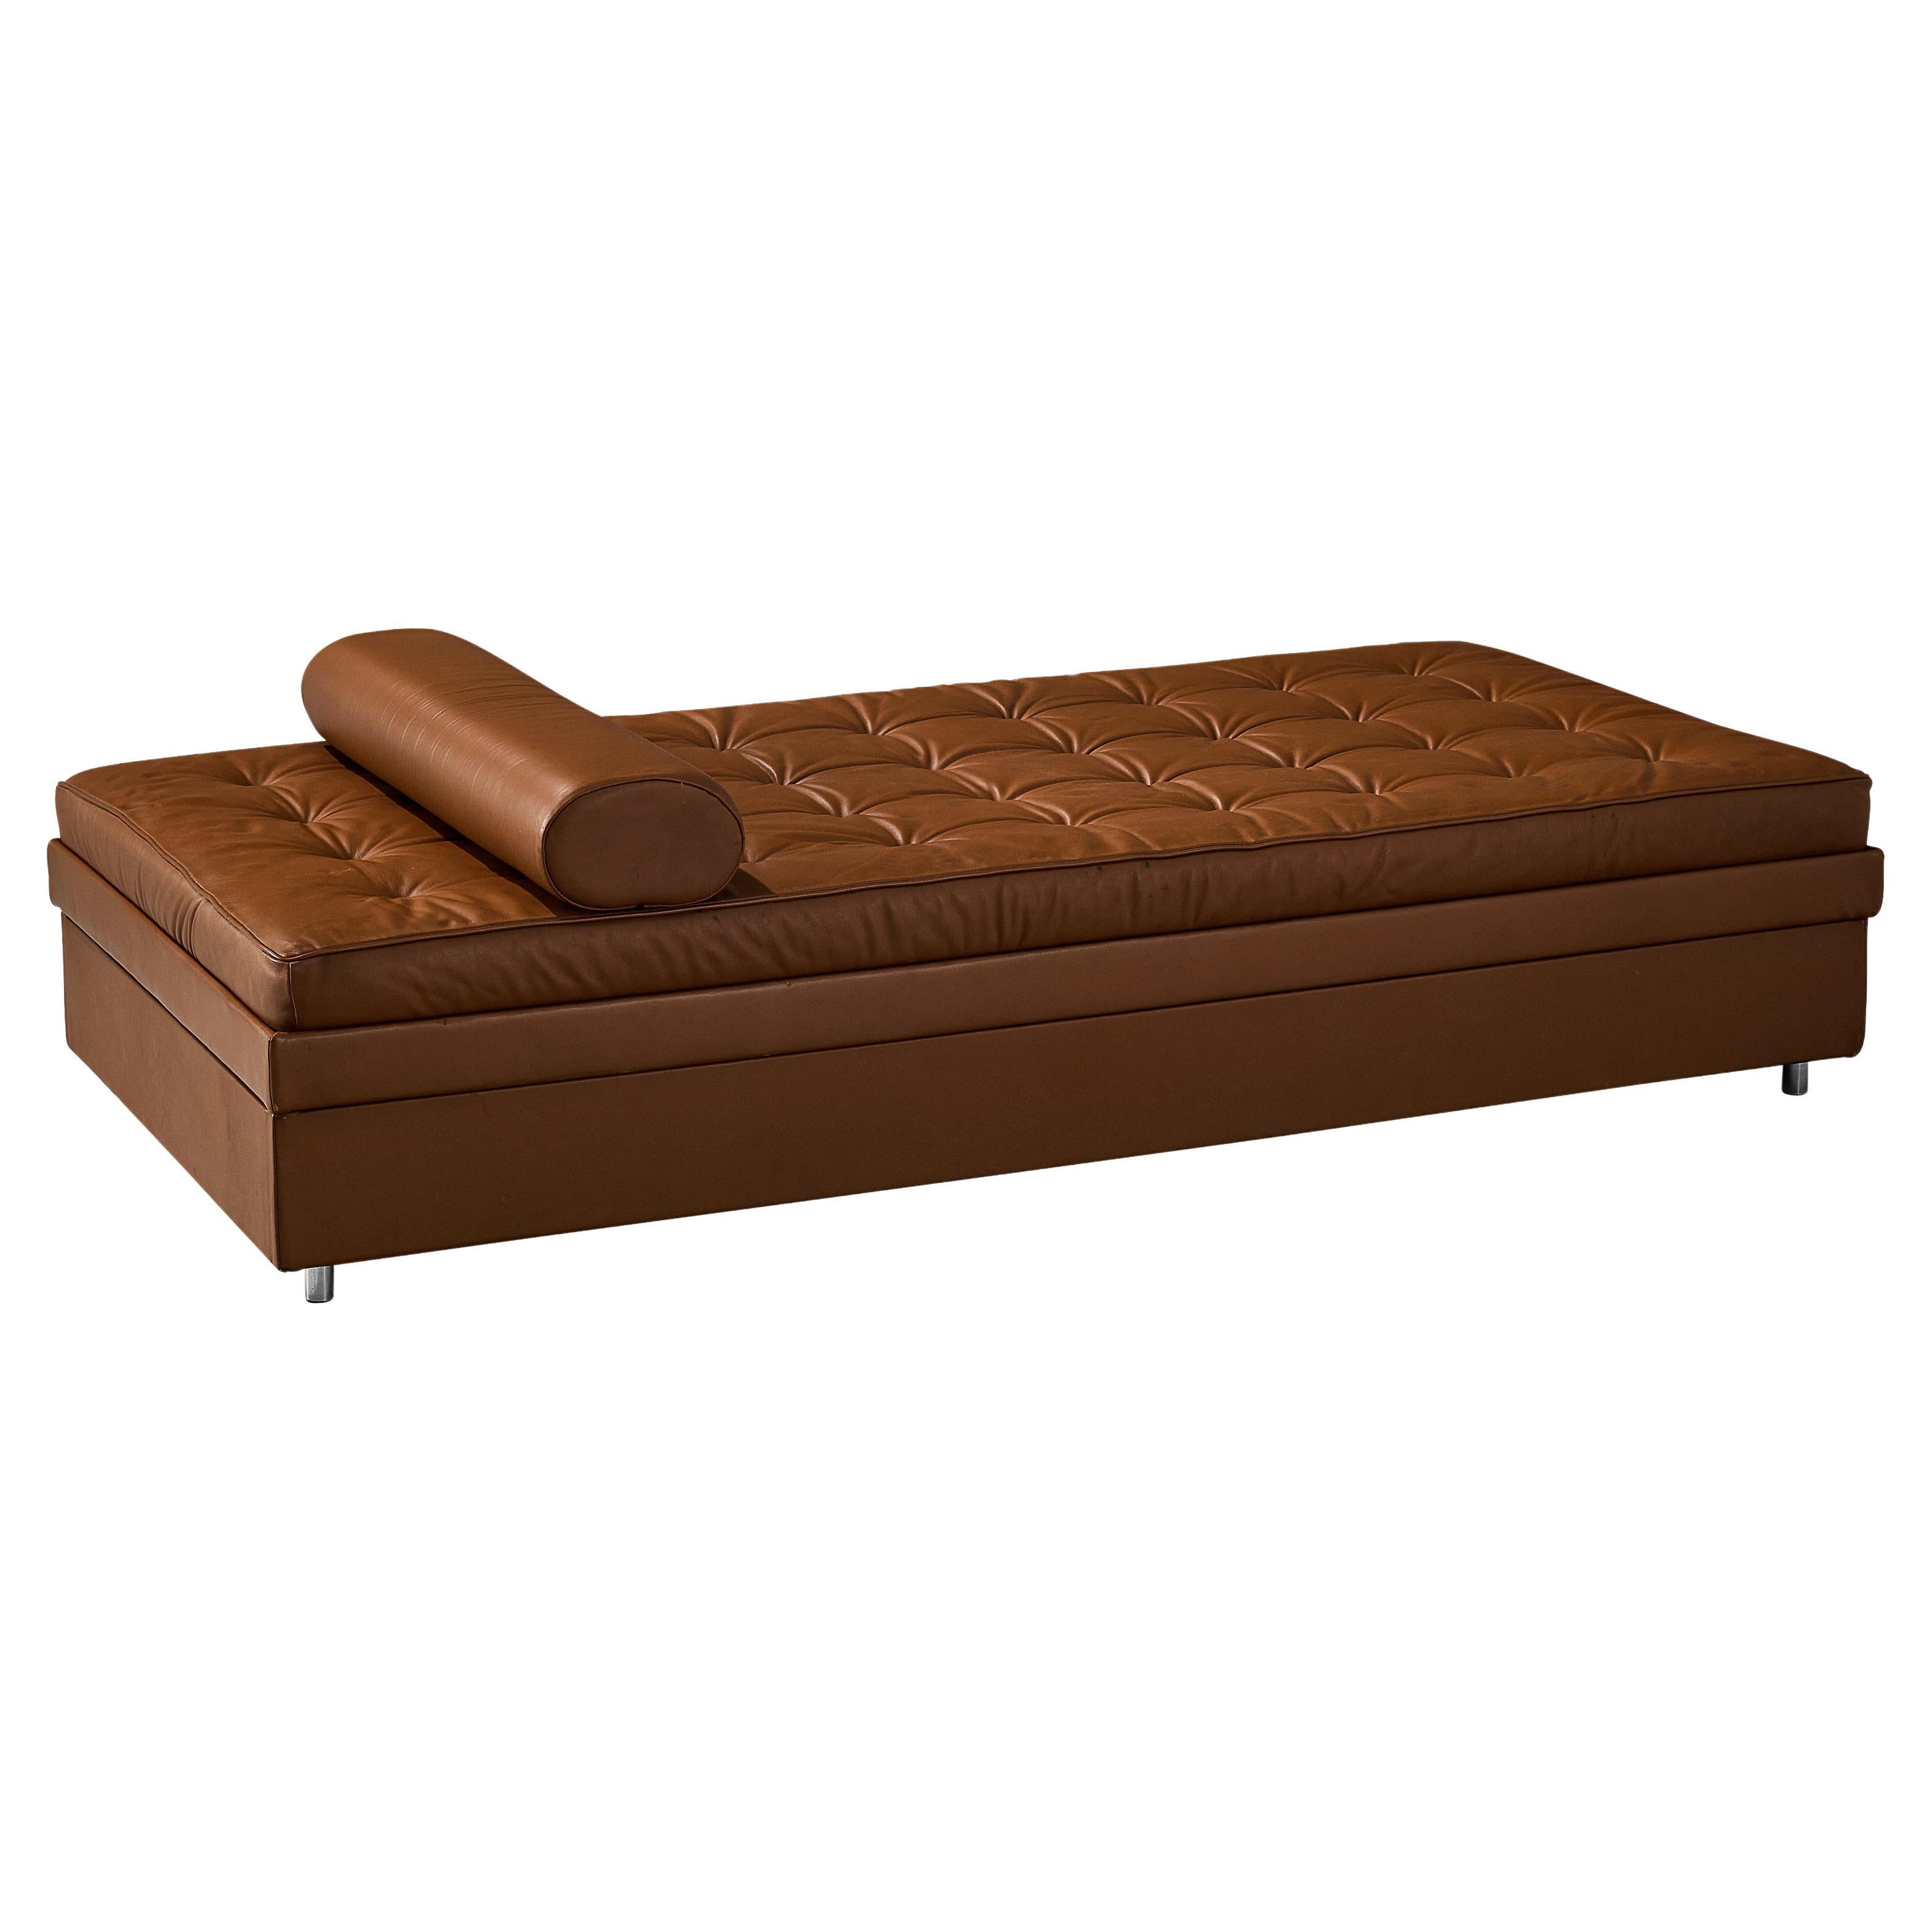 Stylish Daybed in Cognac Leather